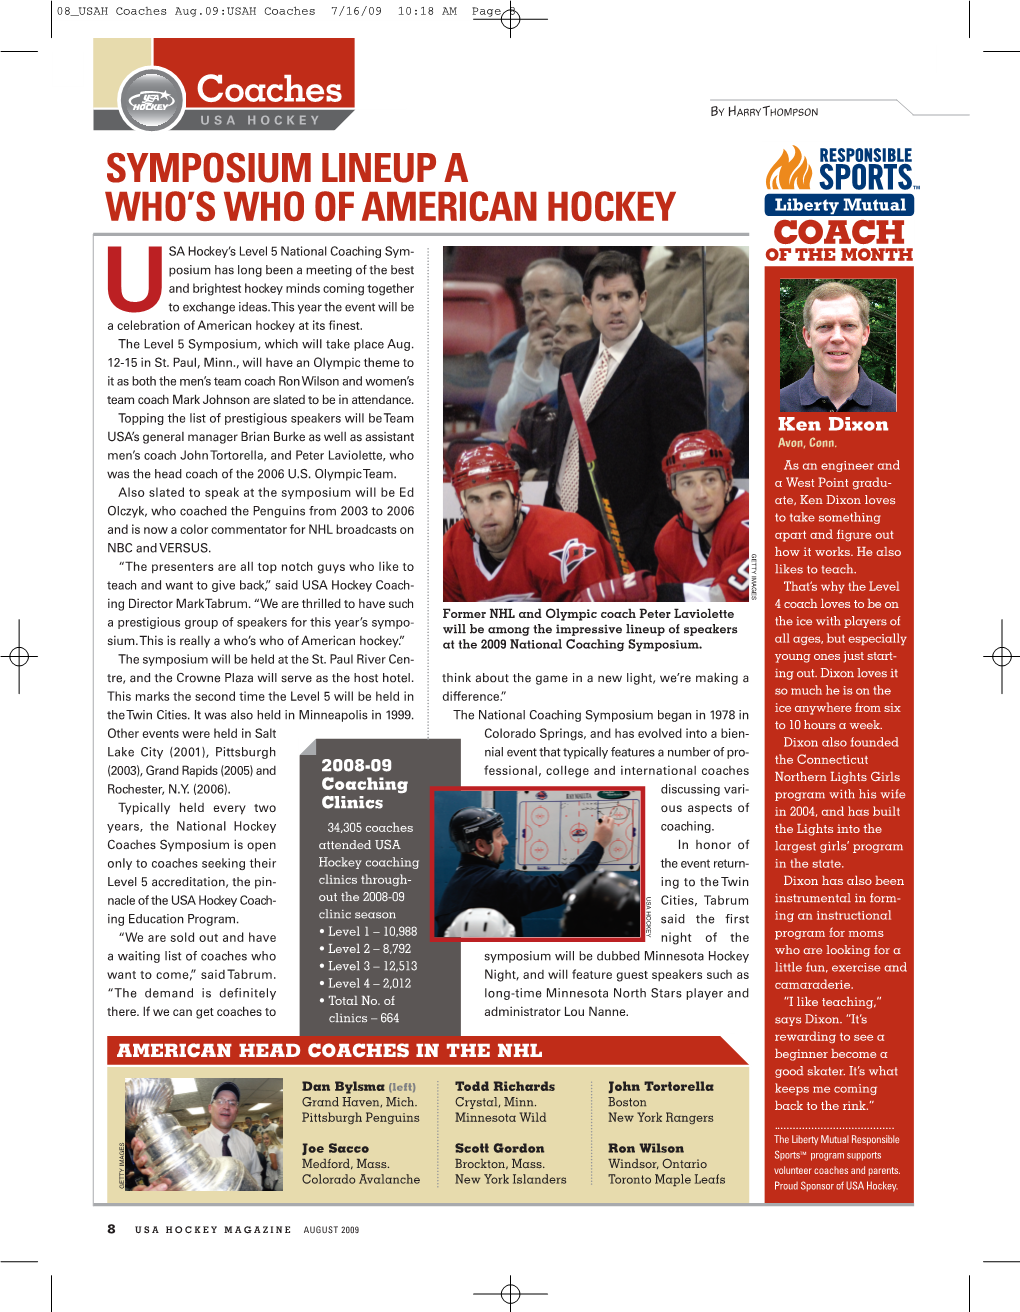 Symposium Lineup a Who's Who of American Hockey